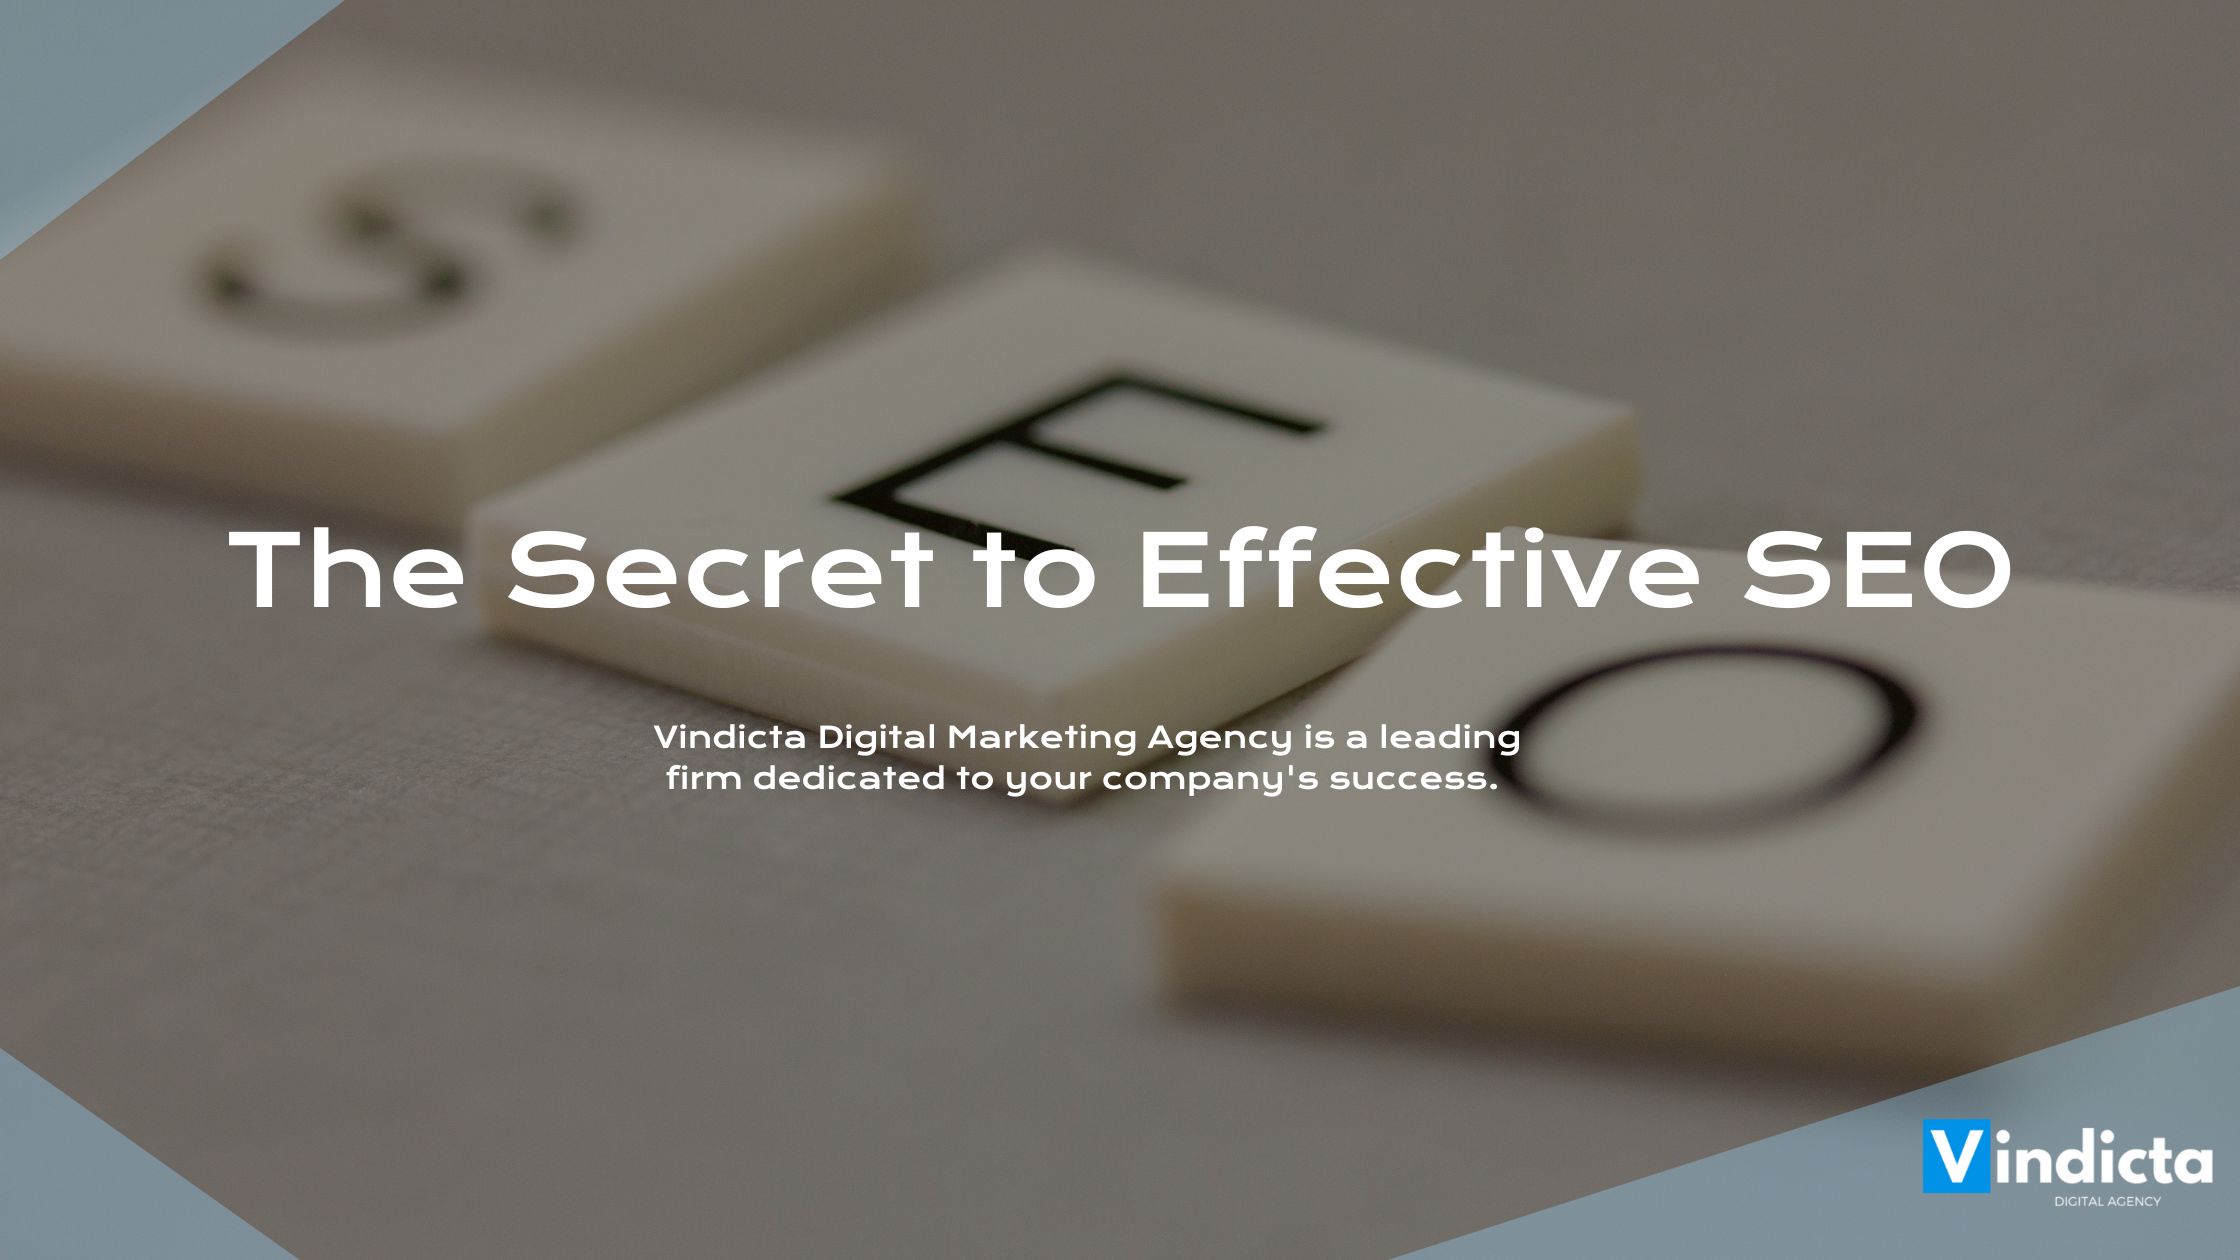 The Secret to Effective SEO: Partnering with a Digital Marketing Agency